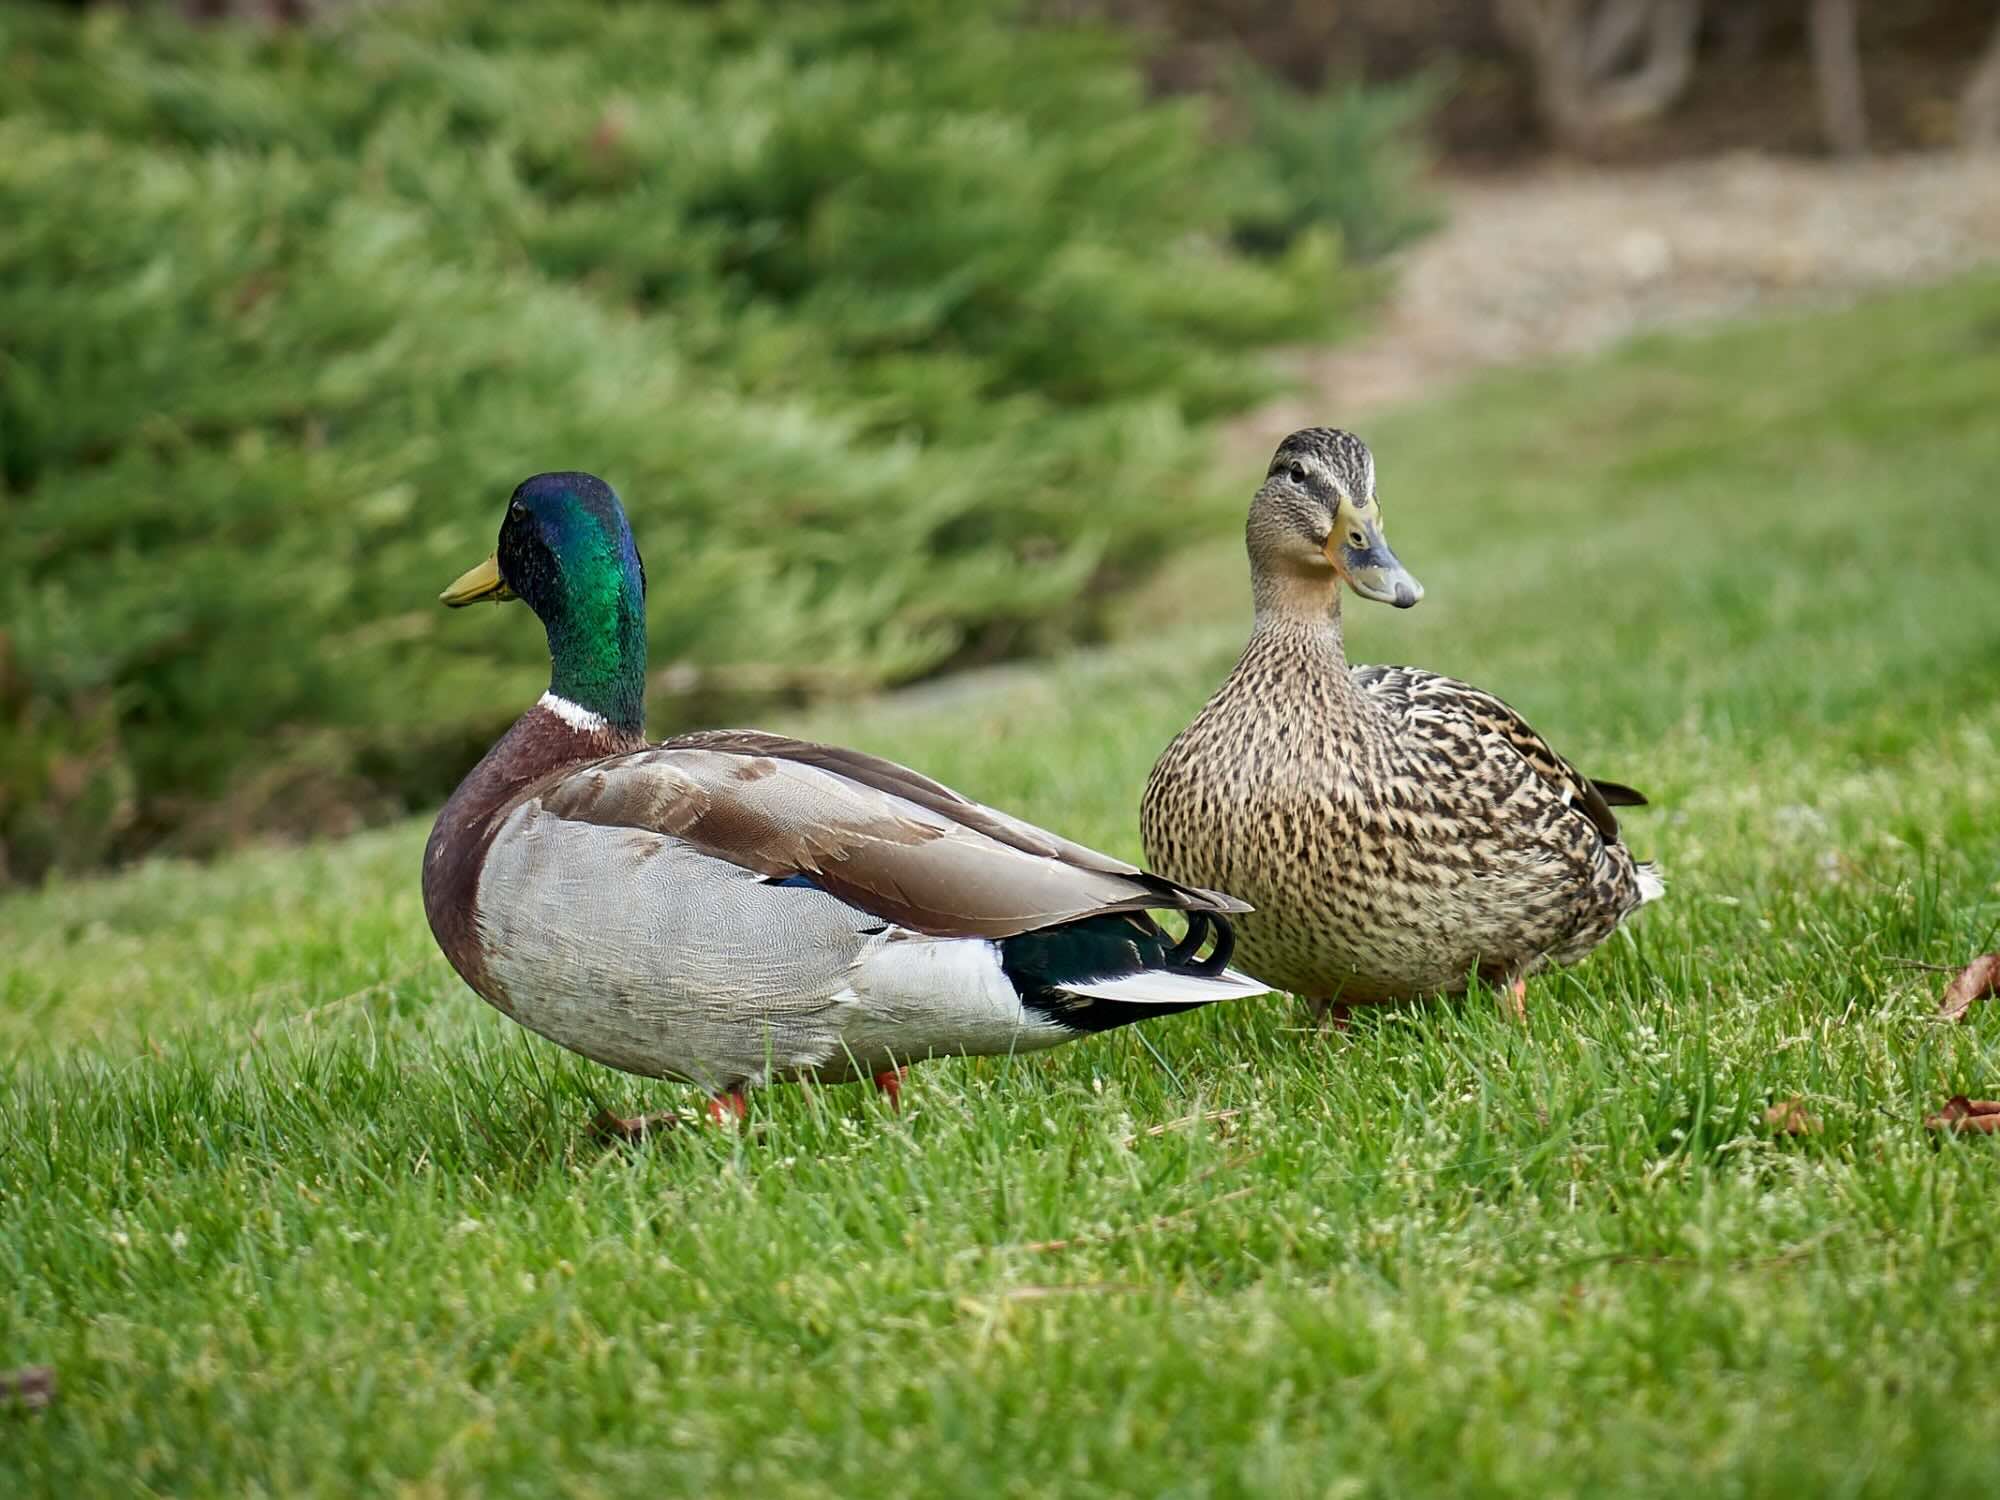 What Are Ducks Eating In The Grass